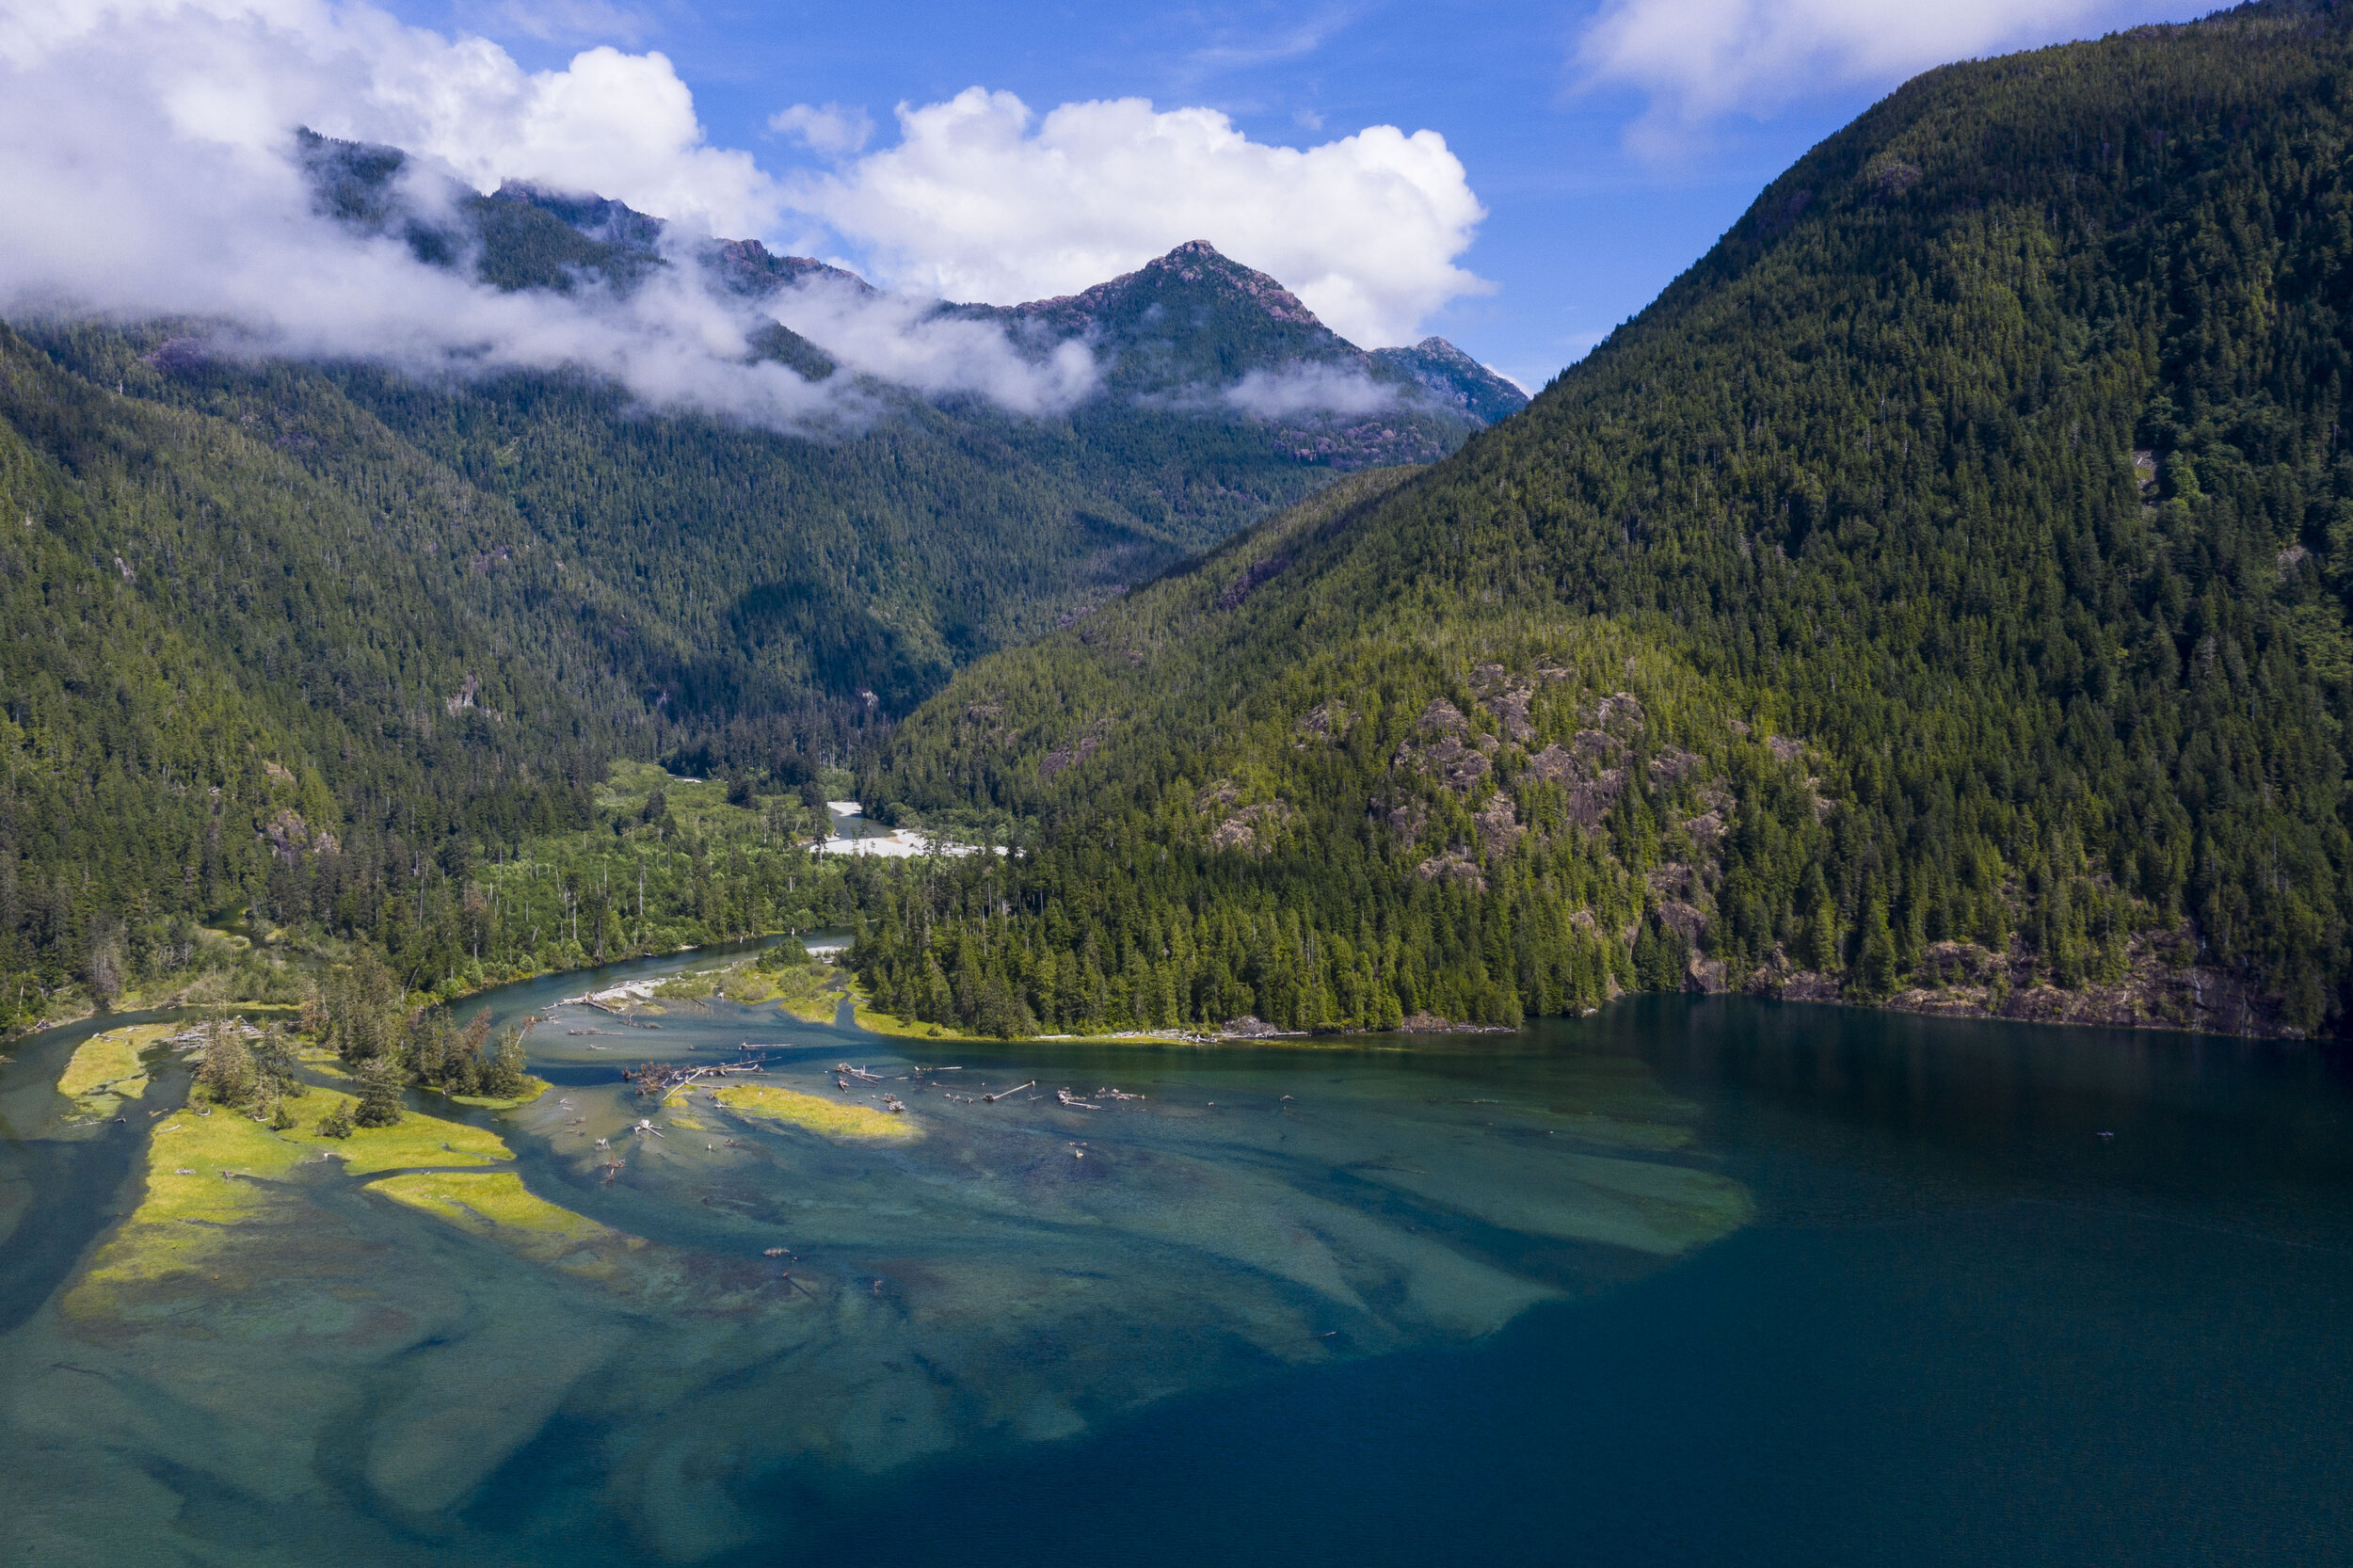  The mouth of the Moyeha River were it empties into Clayoqout Sound. Almost the entire river's watershed is protected in a provincial park but the salmon runs in the river have crashed. To access the open ocean, young salmon leaving the river must pa